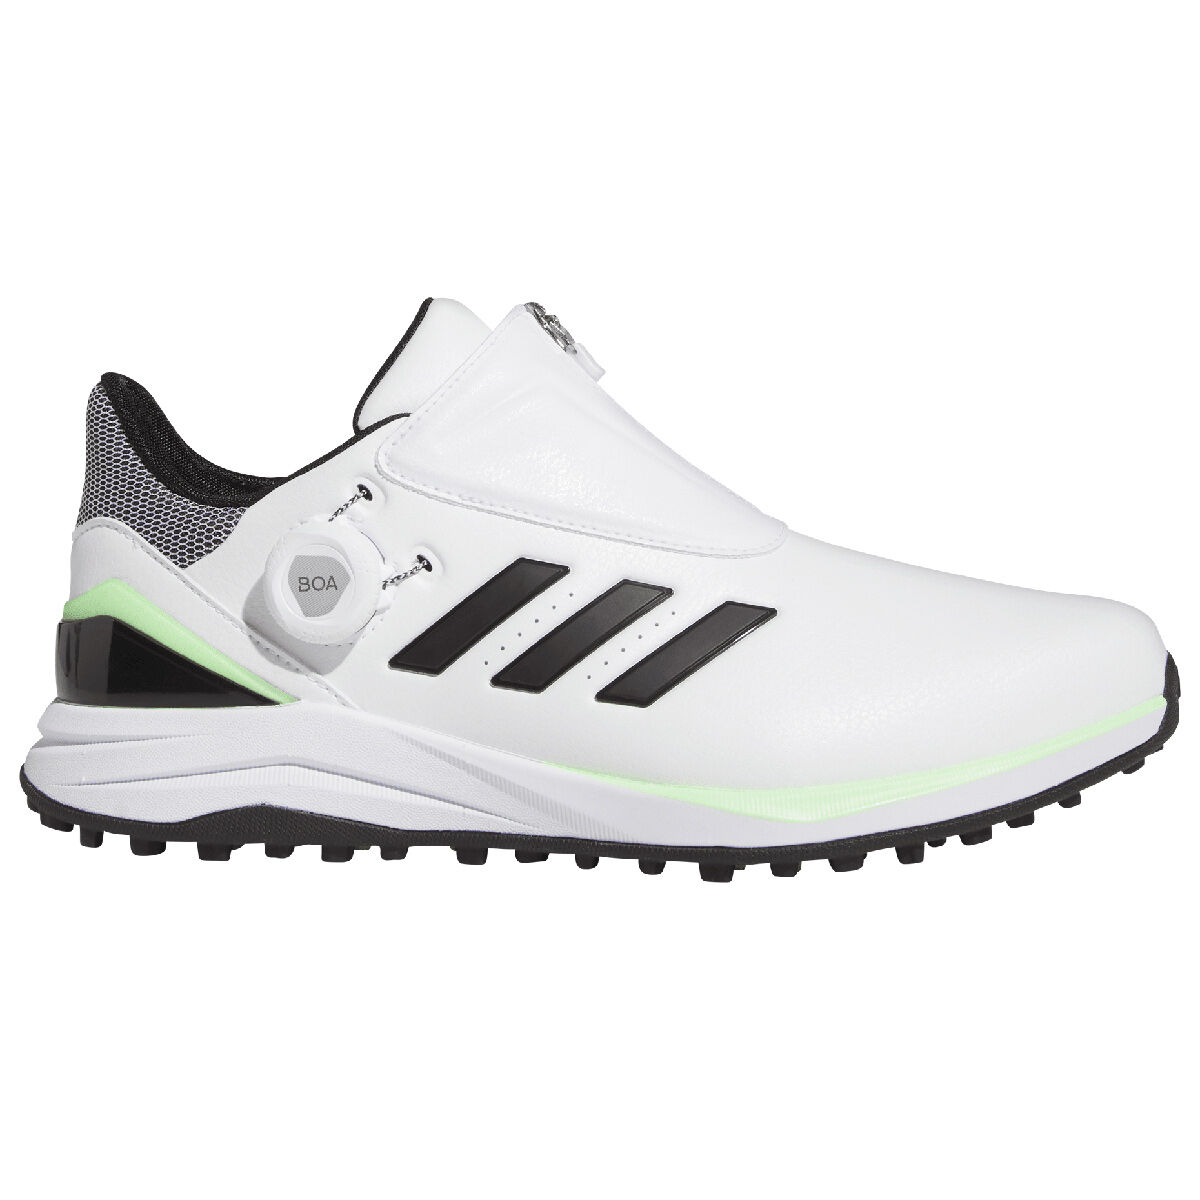 adidas SOLARmotion BOA Spikeless Waterproof Golf Shoes, Mens, White/core black/green spark, 8 | American Golf